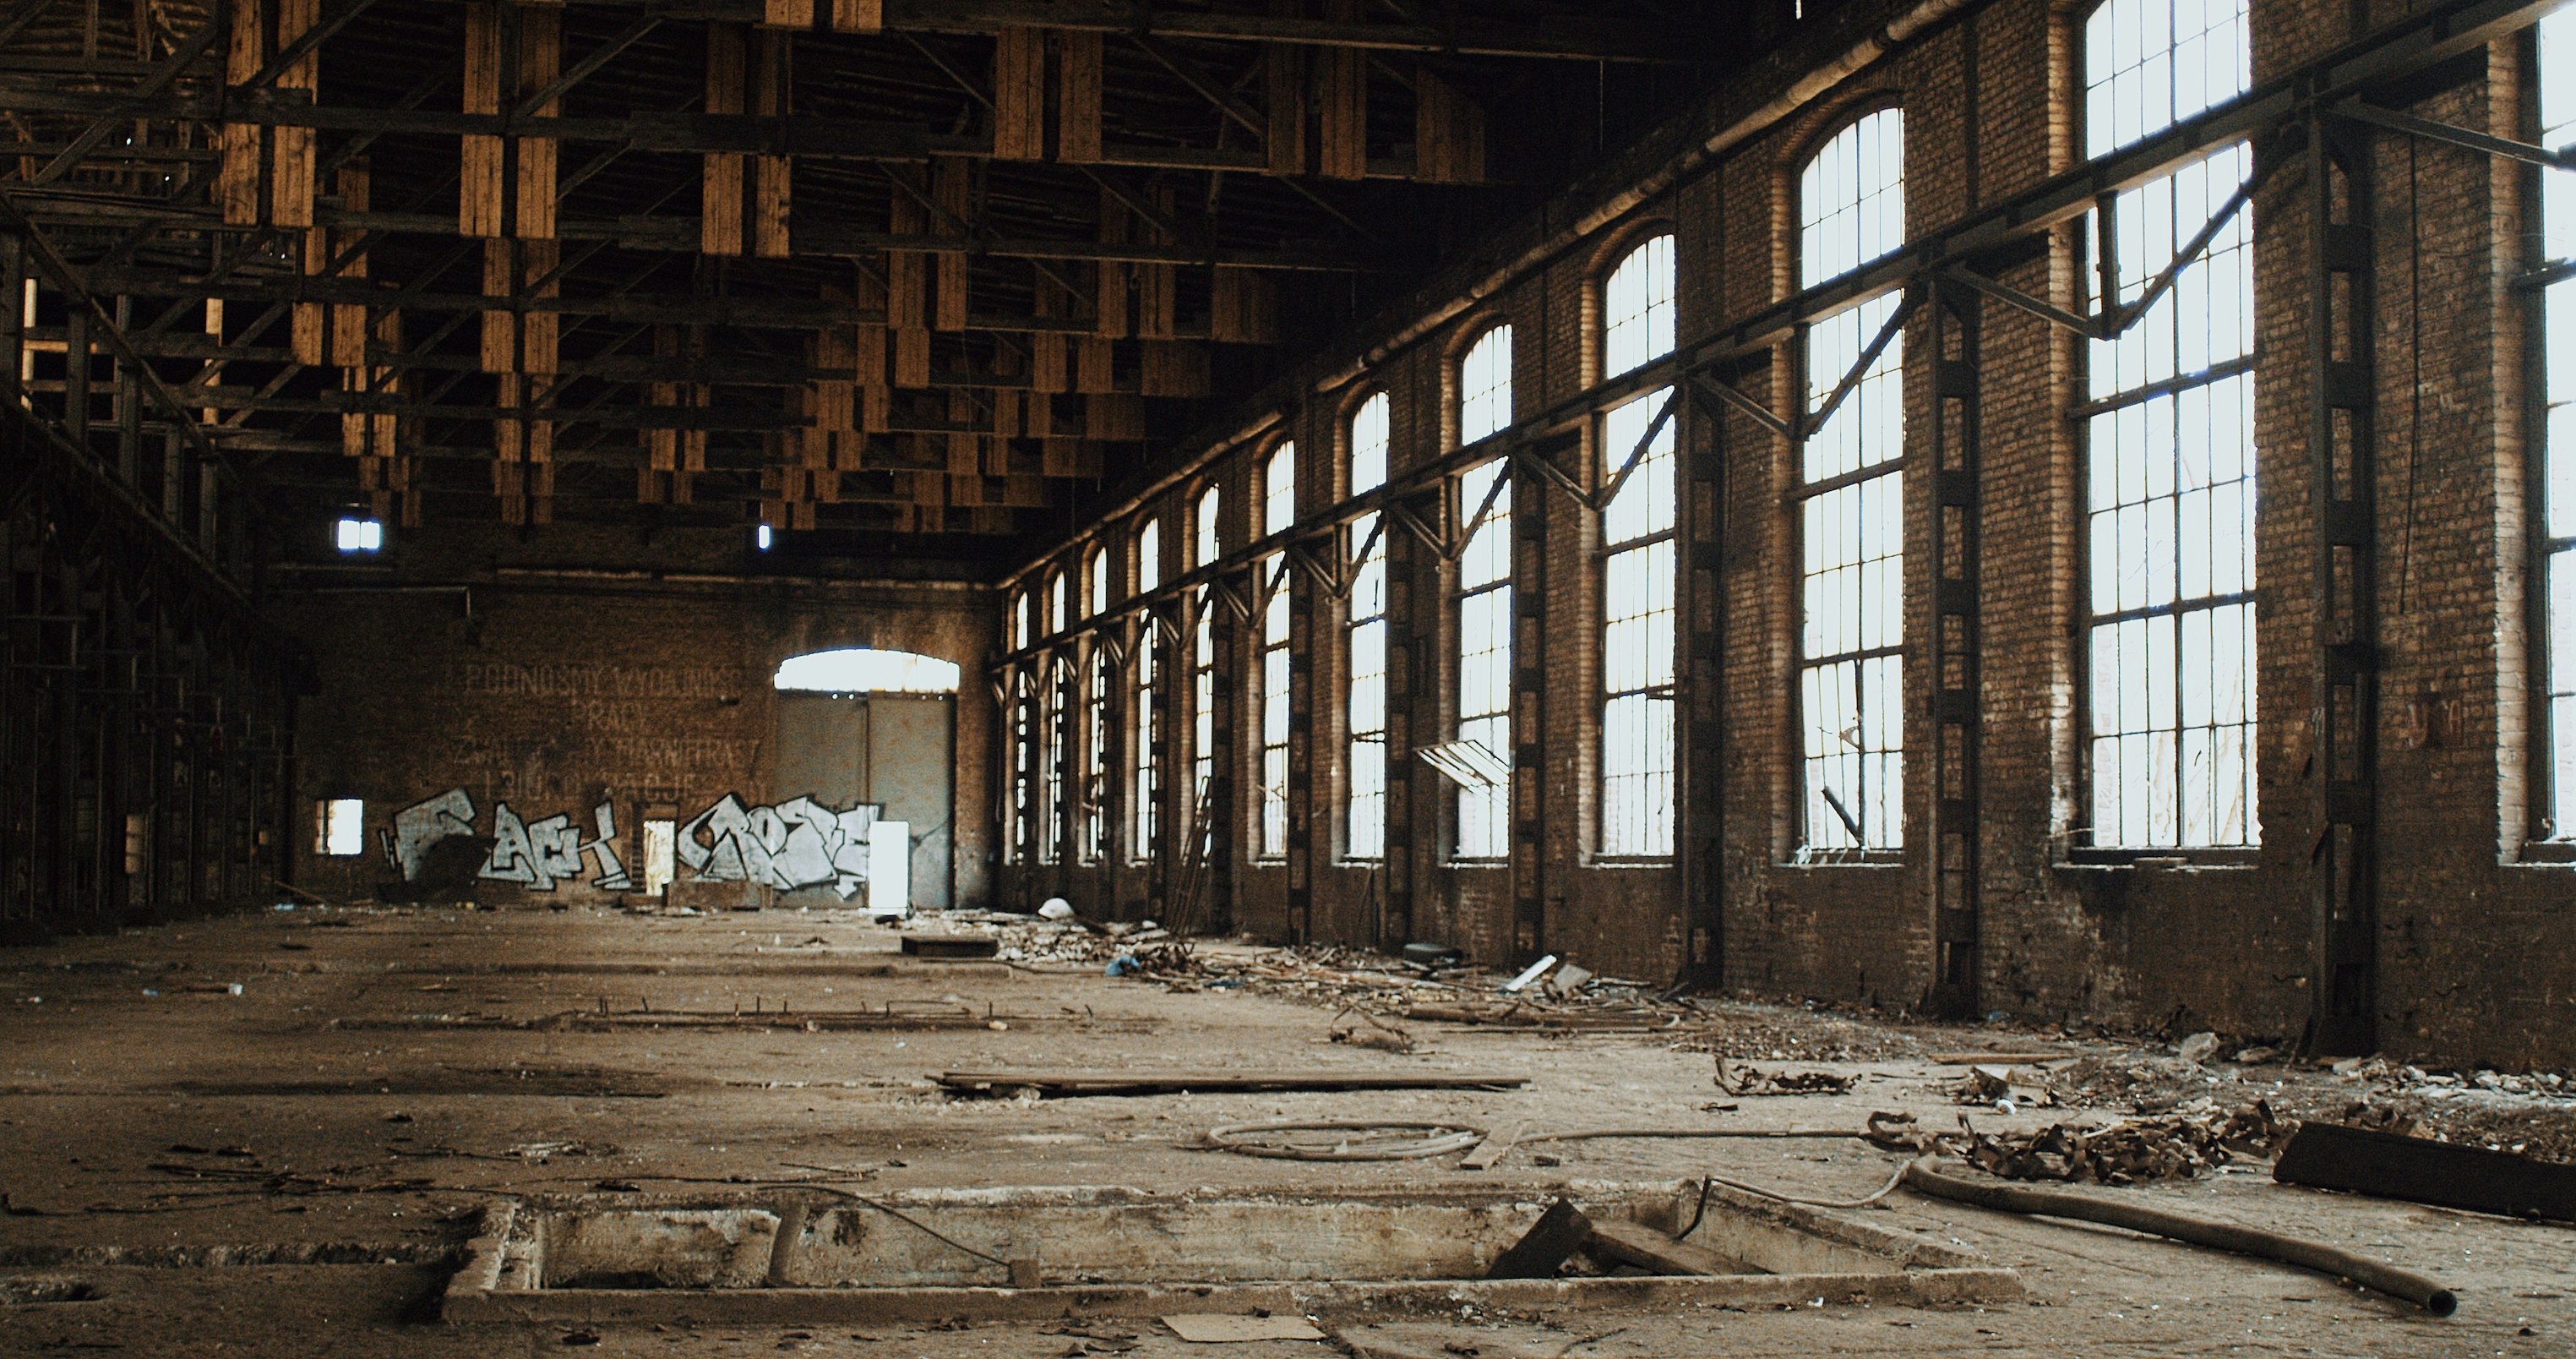 Large abandoned room with tall windows and debris on the ground